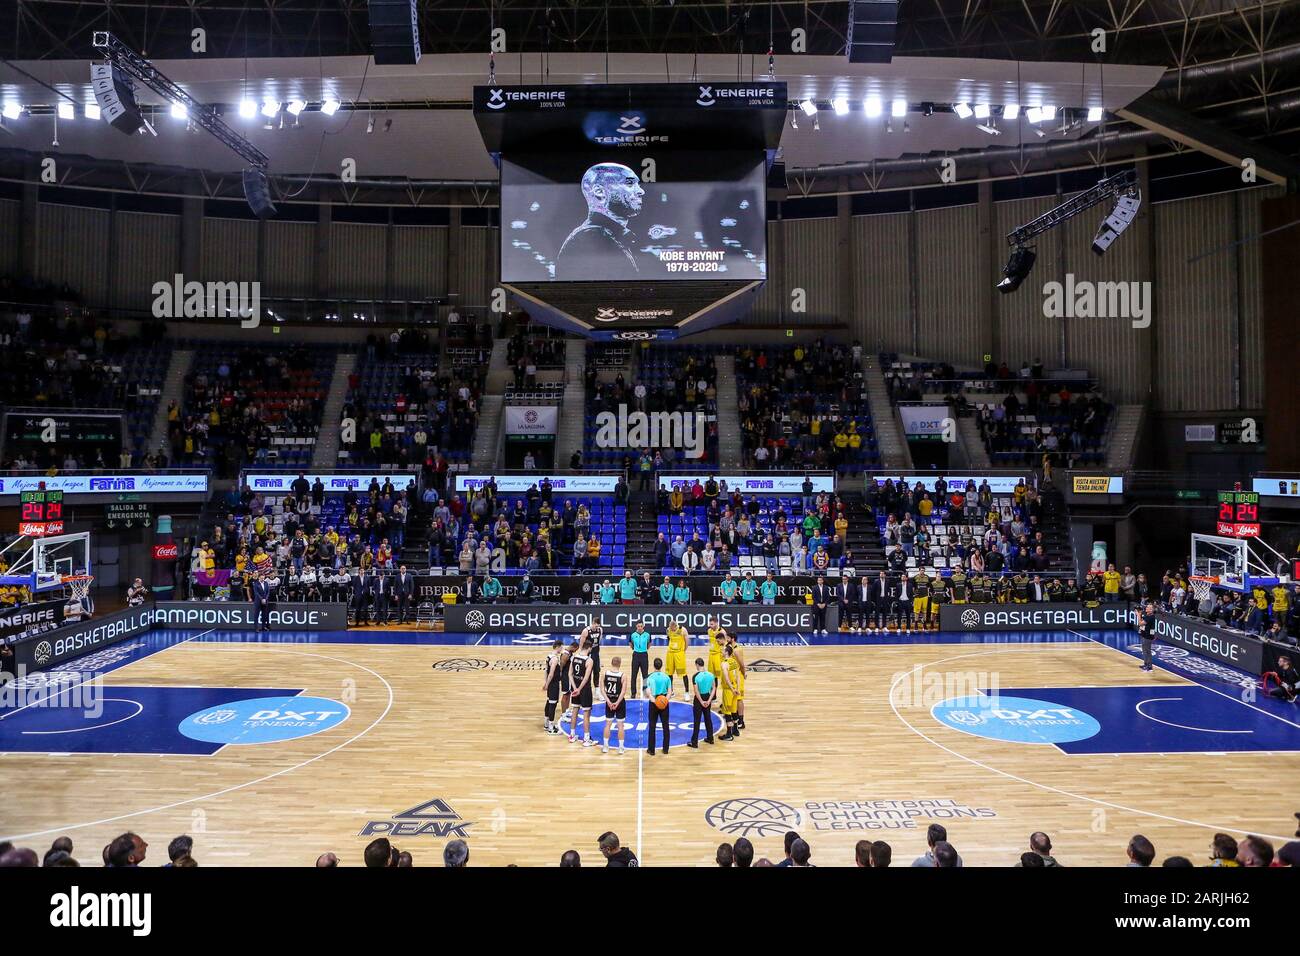 Tenerife, Italy. 28th Jan, 2020. minute of silence ad inizio partita in  onore of kobe bryant during Iberostar Tenerife vs Vef Riga, Basketball  Champions League in Tenerife, Italy, January 28 2020 Credit: